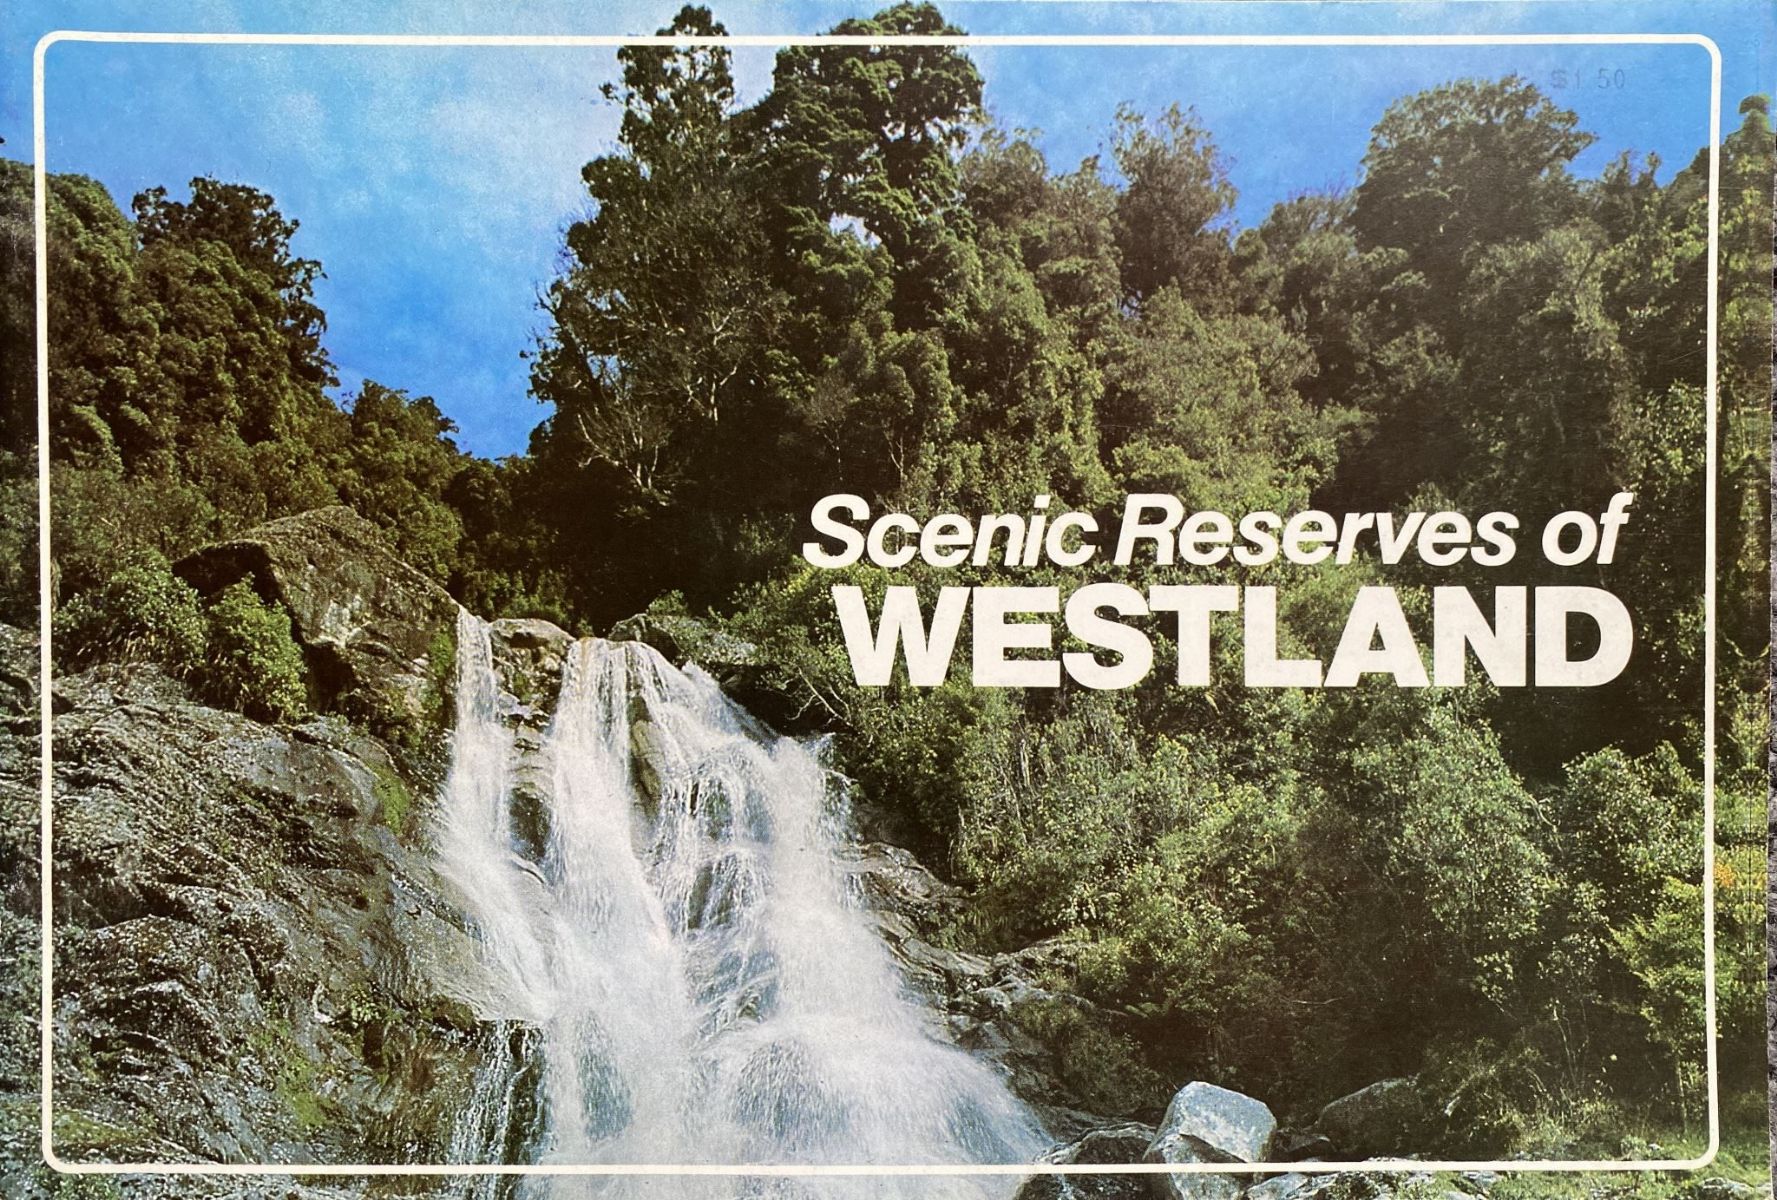 SCENIC RESERVES OF WESTLAND